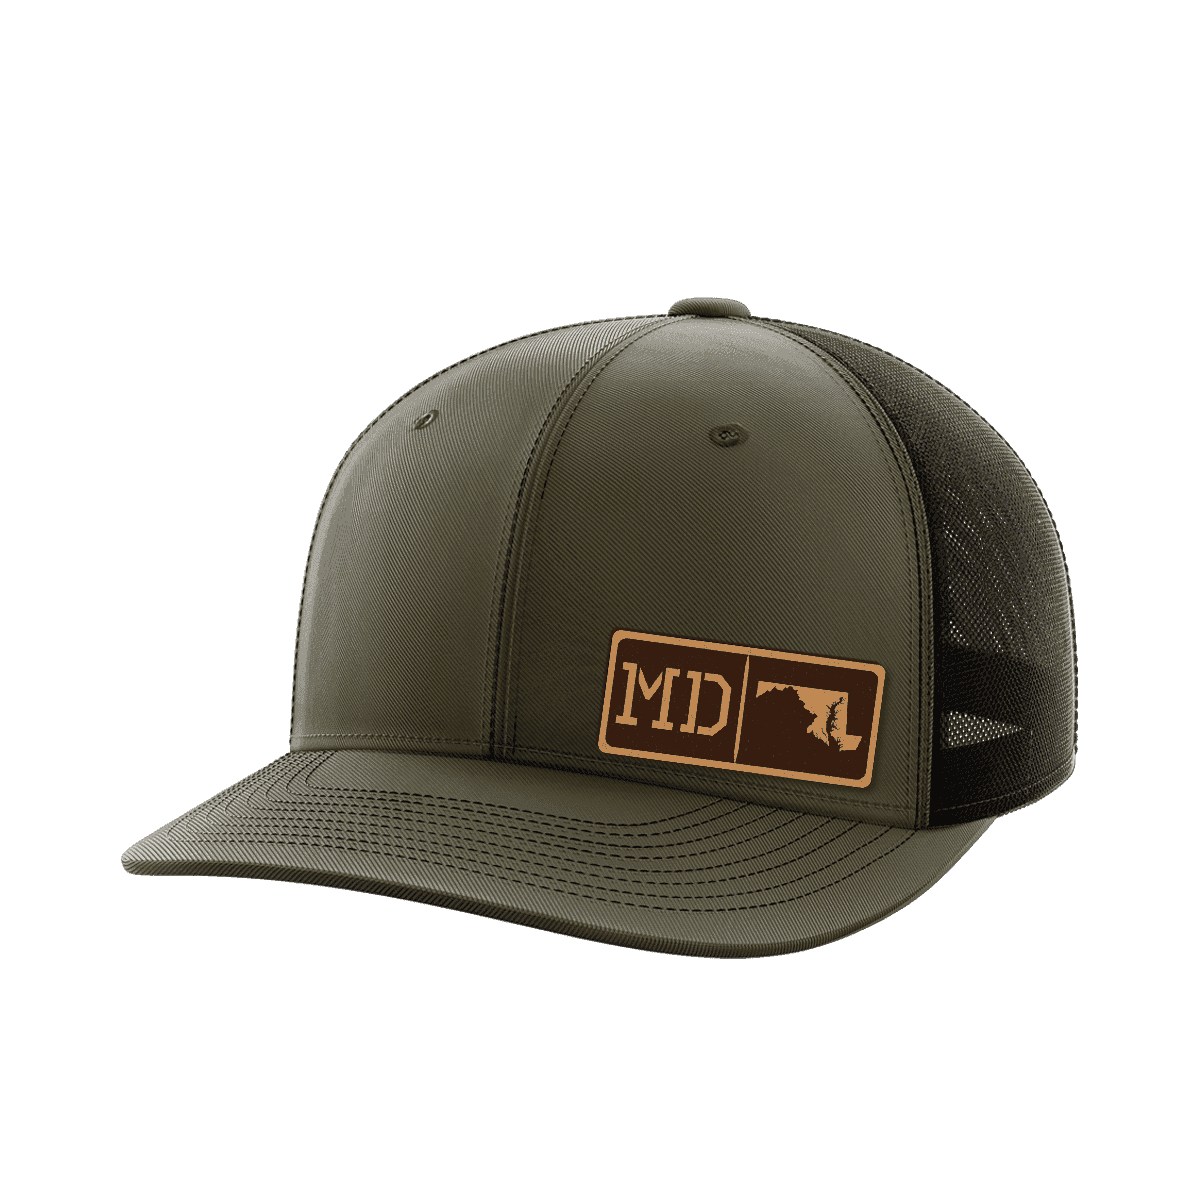 Maryland Homegrown Hats - Greater Half